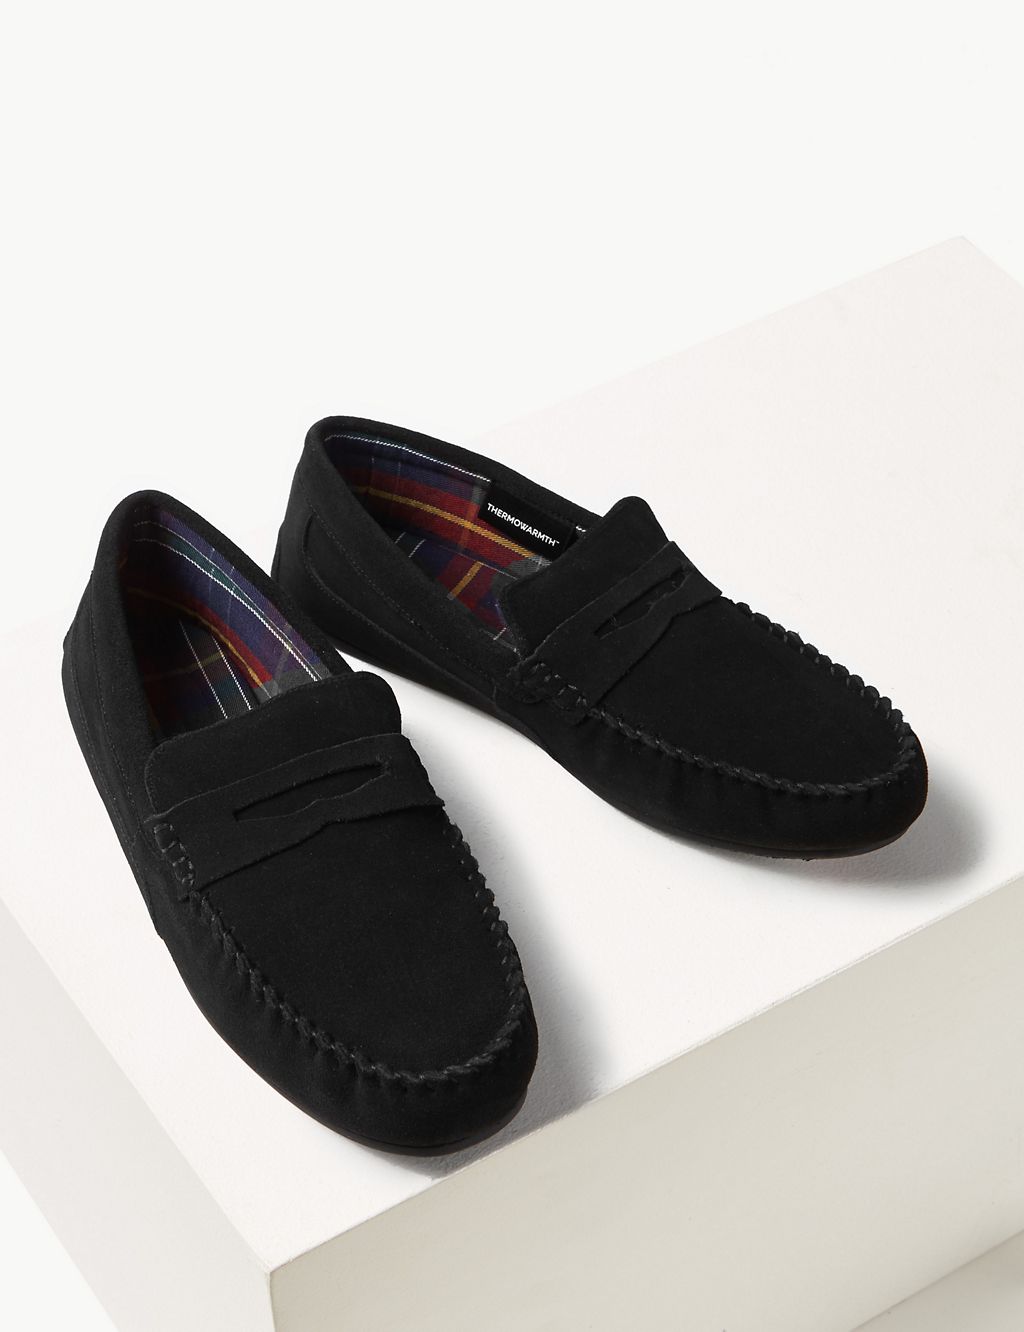 Suede Slippers with Freshfeet™ | M&S Collection | M&S